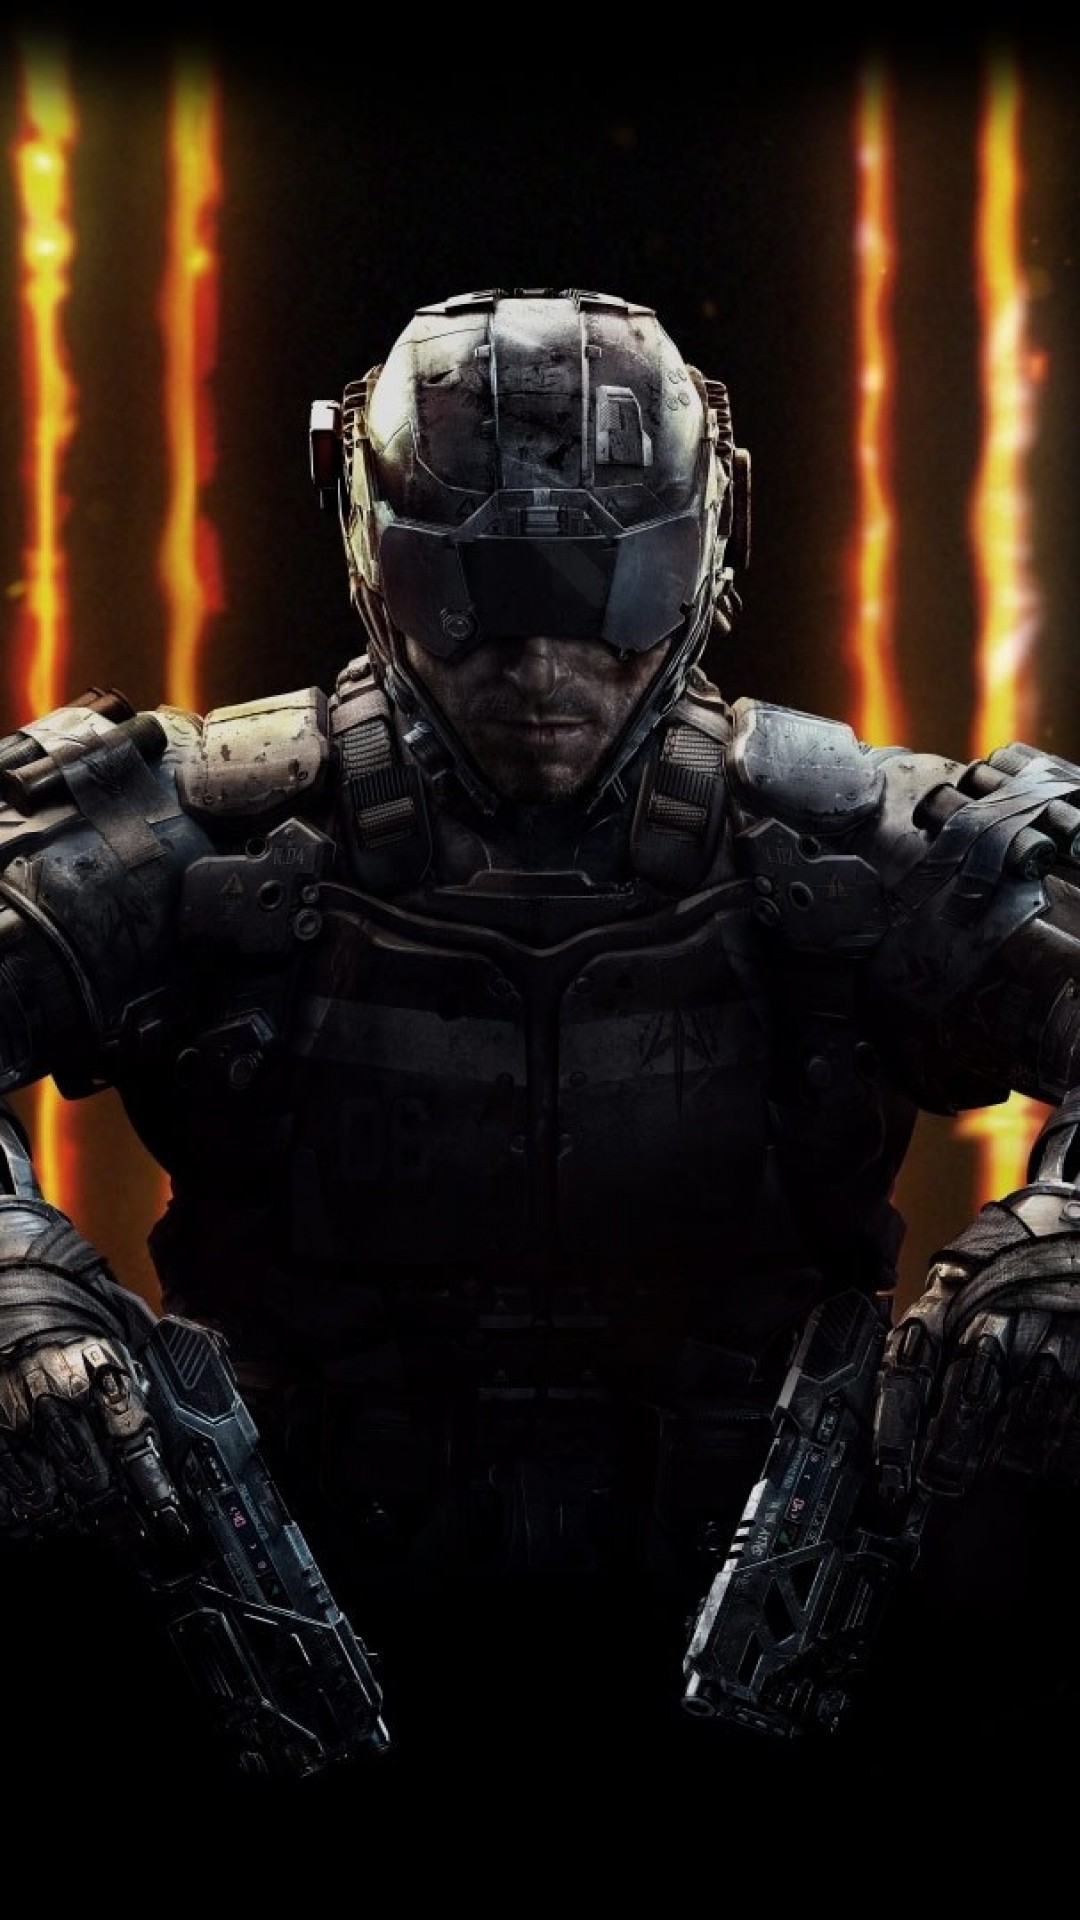 1080x1920  Wallpaper call of duty, black ops 3, activision publishing